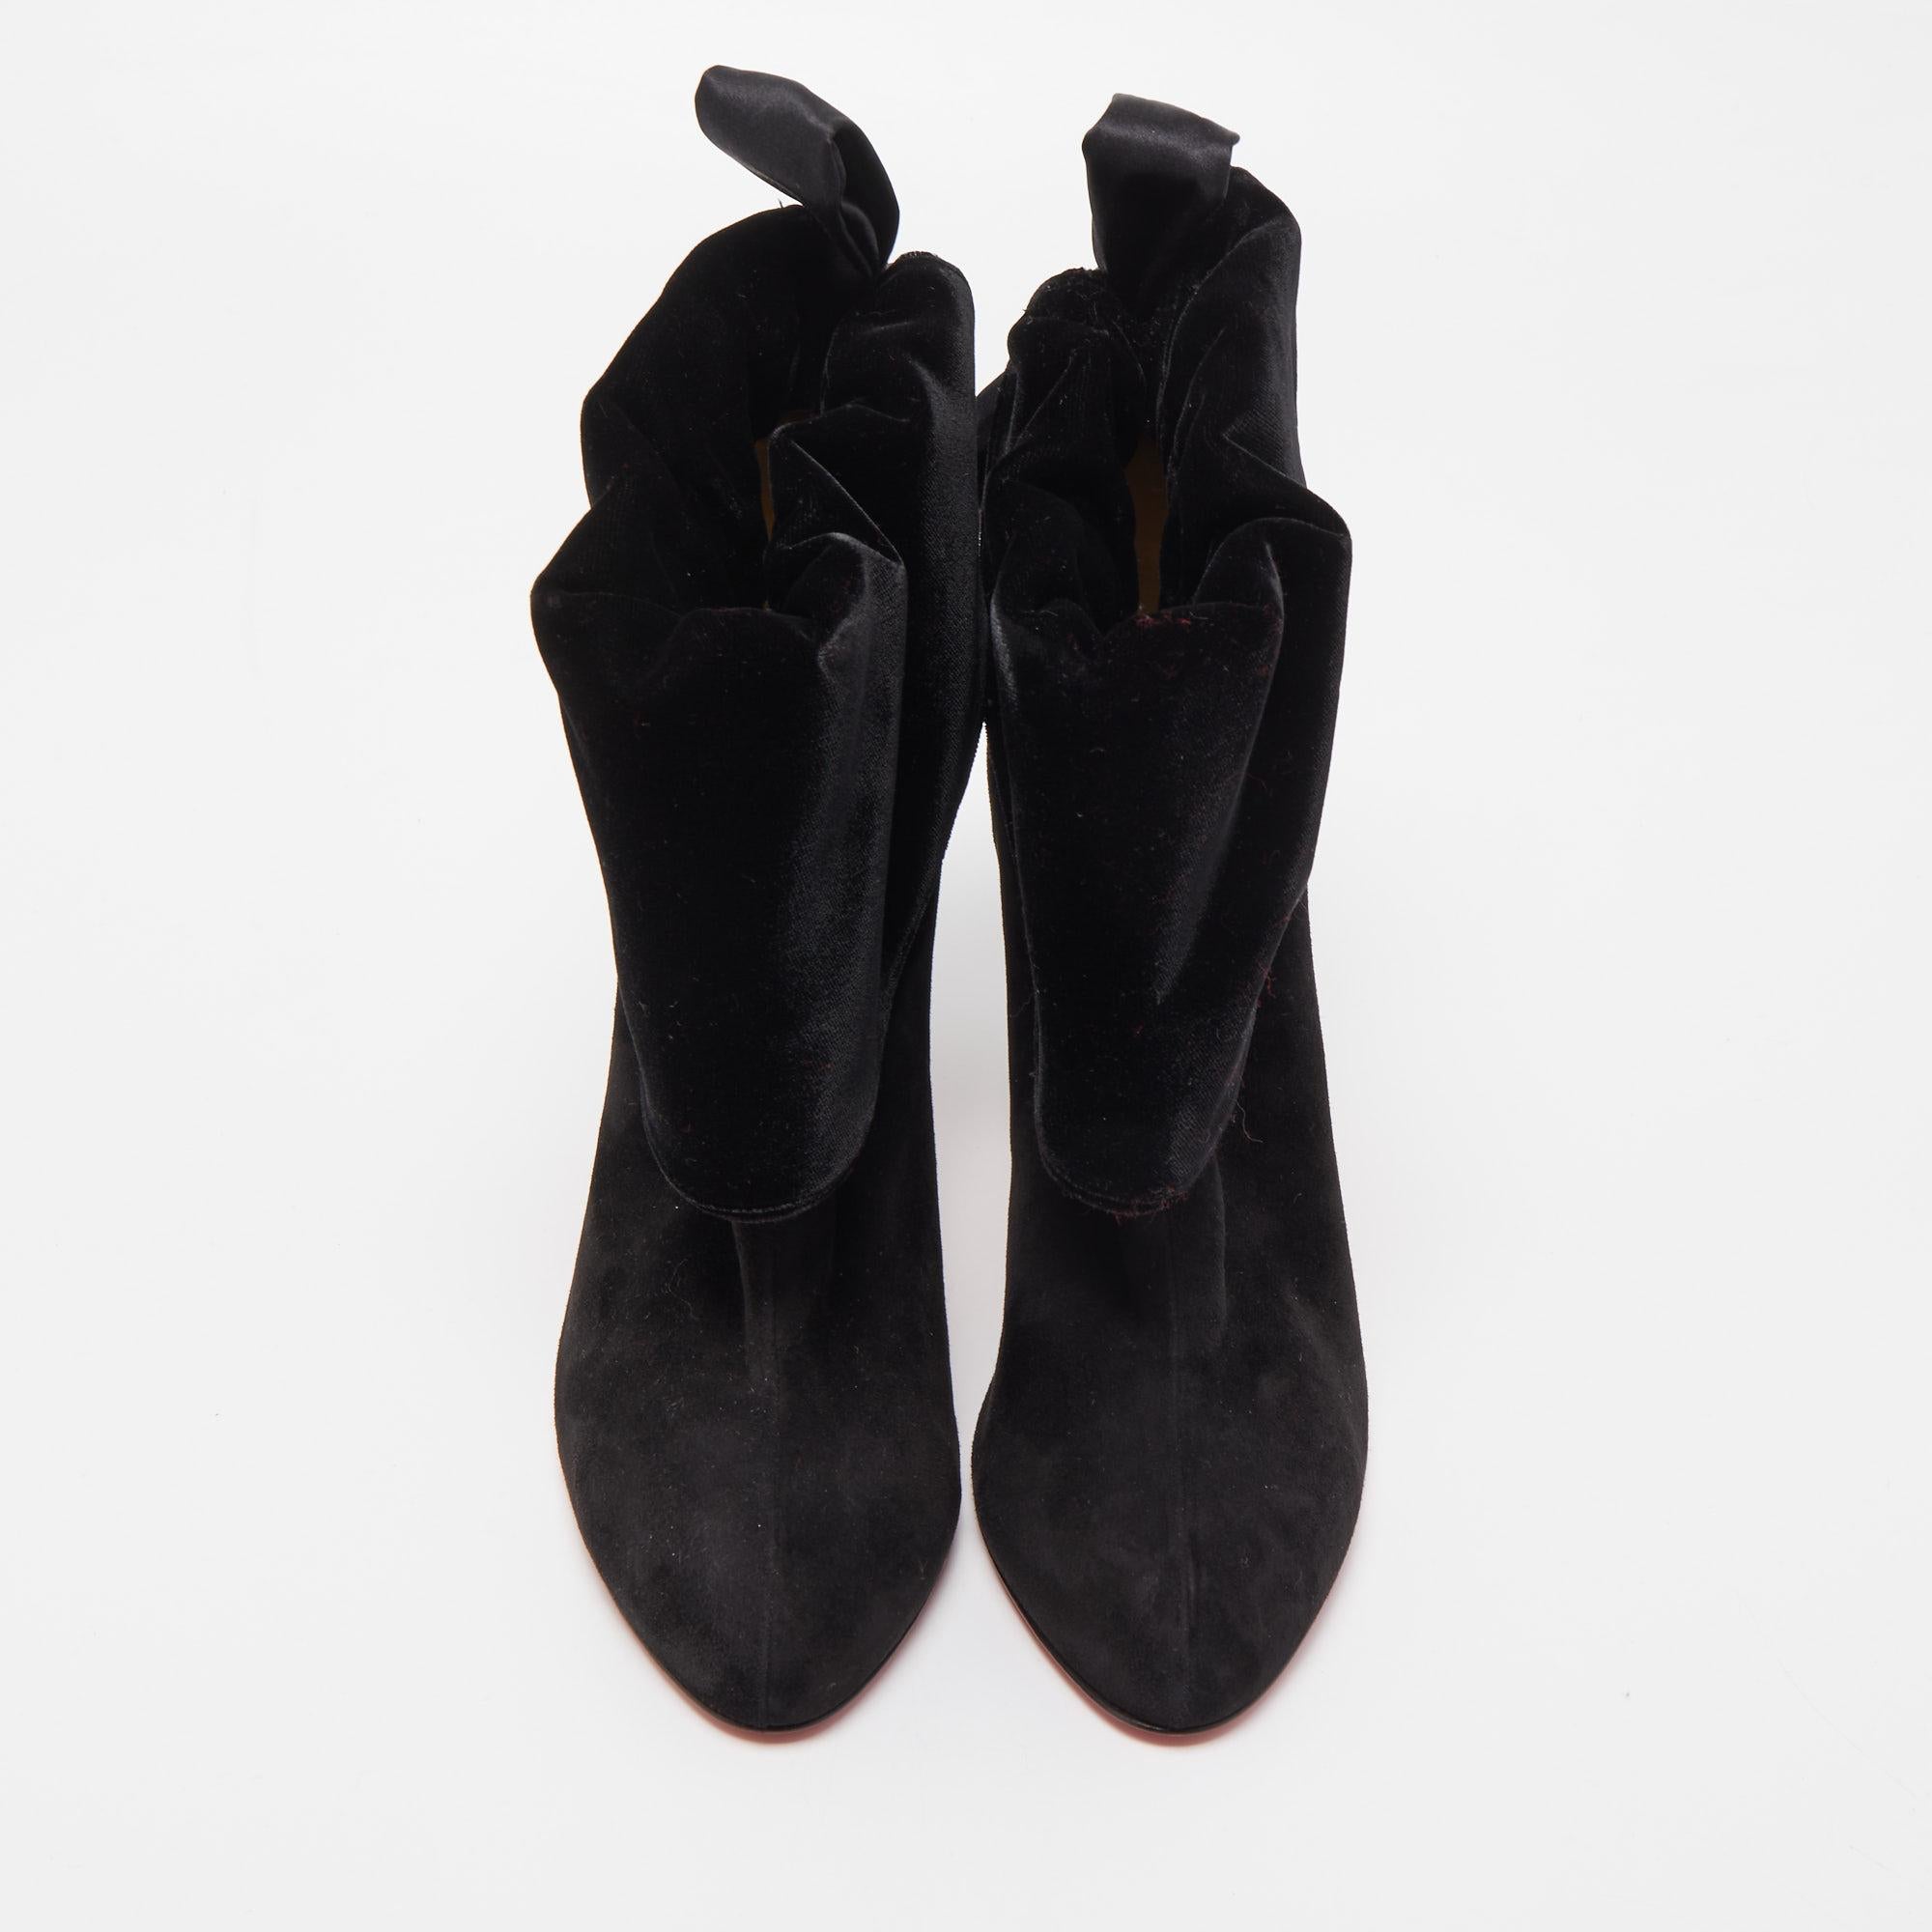 Enjoy the most fashionable days with these stylish booties. Modern in design and craftsmanship, they are fashioned to keep you comfortable and chic!

Includes: Original Dustbag, Original Box, Tips

